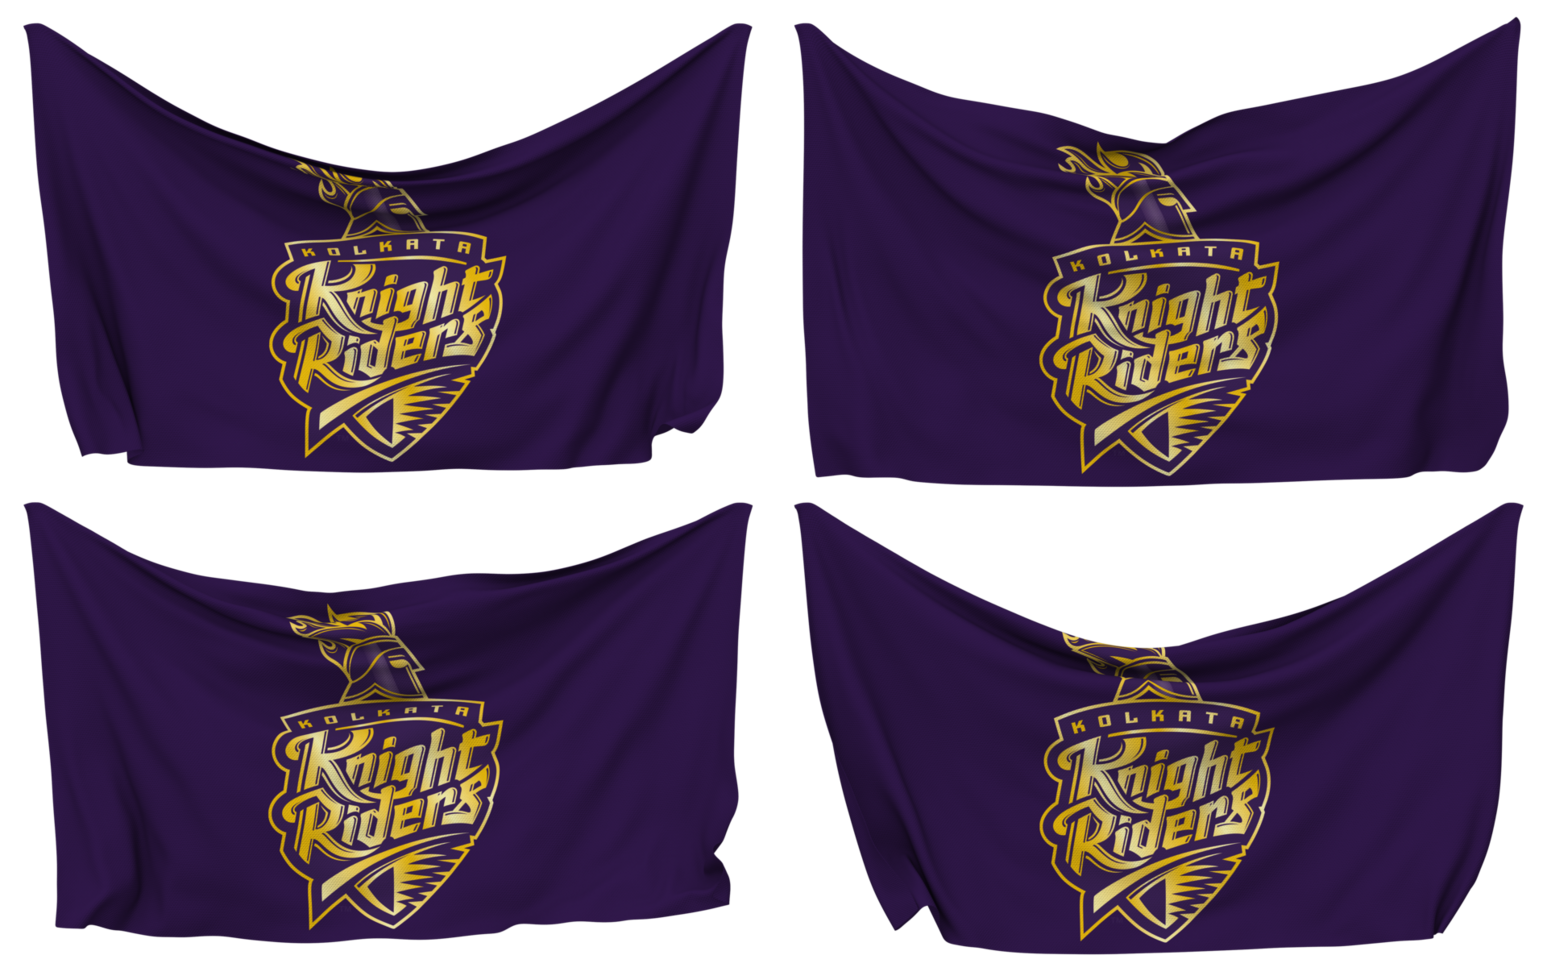 Kolkata Knight Riders, KKR Pinned Flag from Corners, Isolated with Different Waving Variations, 3D Rendering png